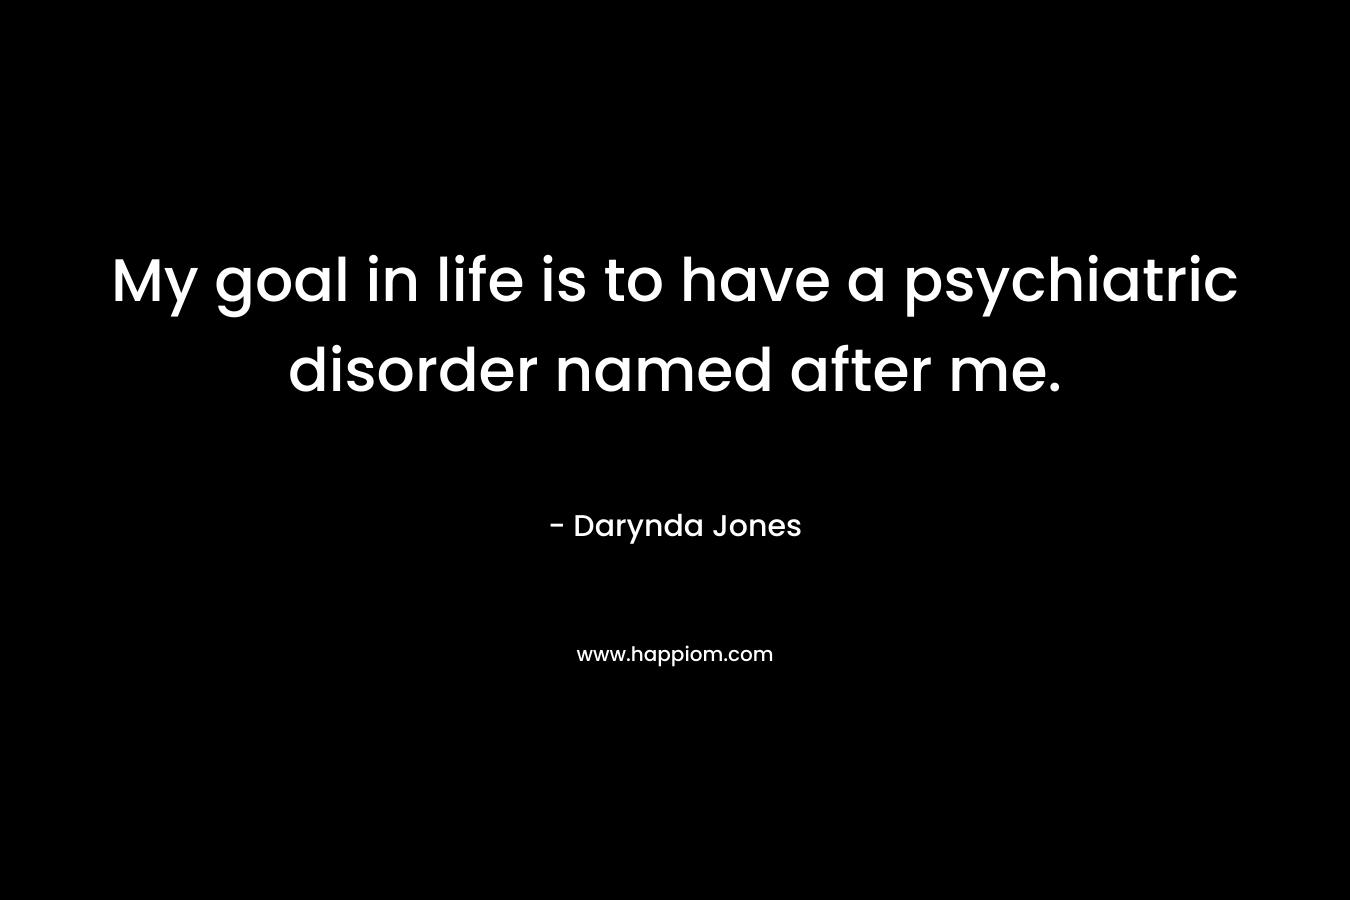 My goal in life is to have a psychiatric disorder named after me.